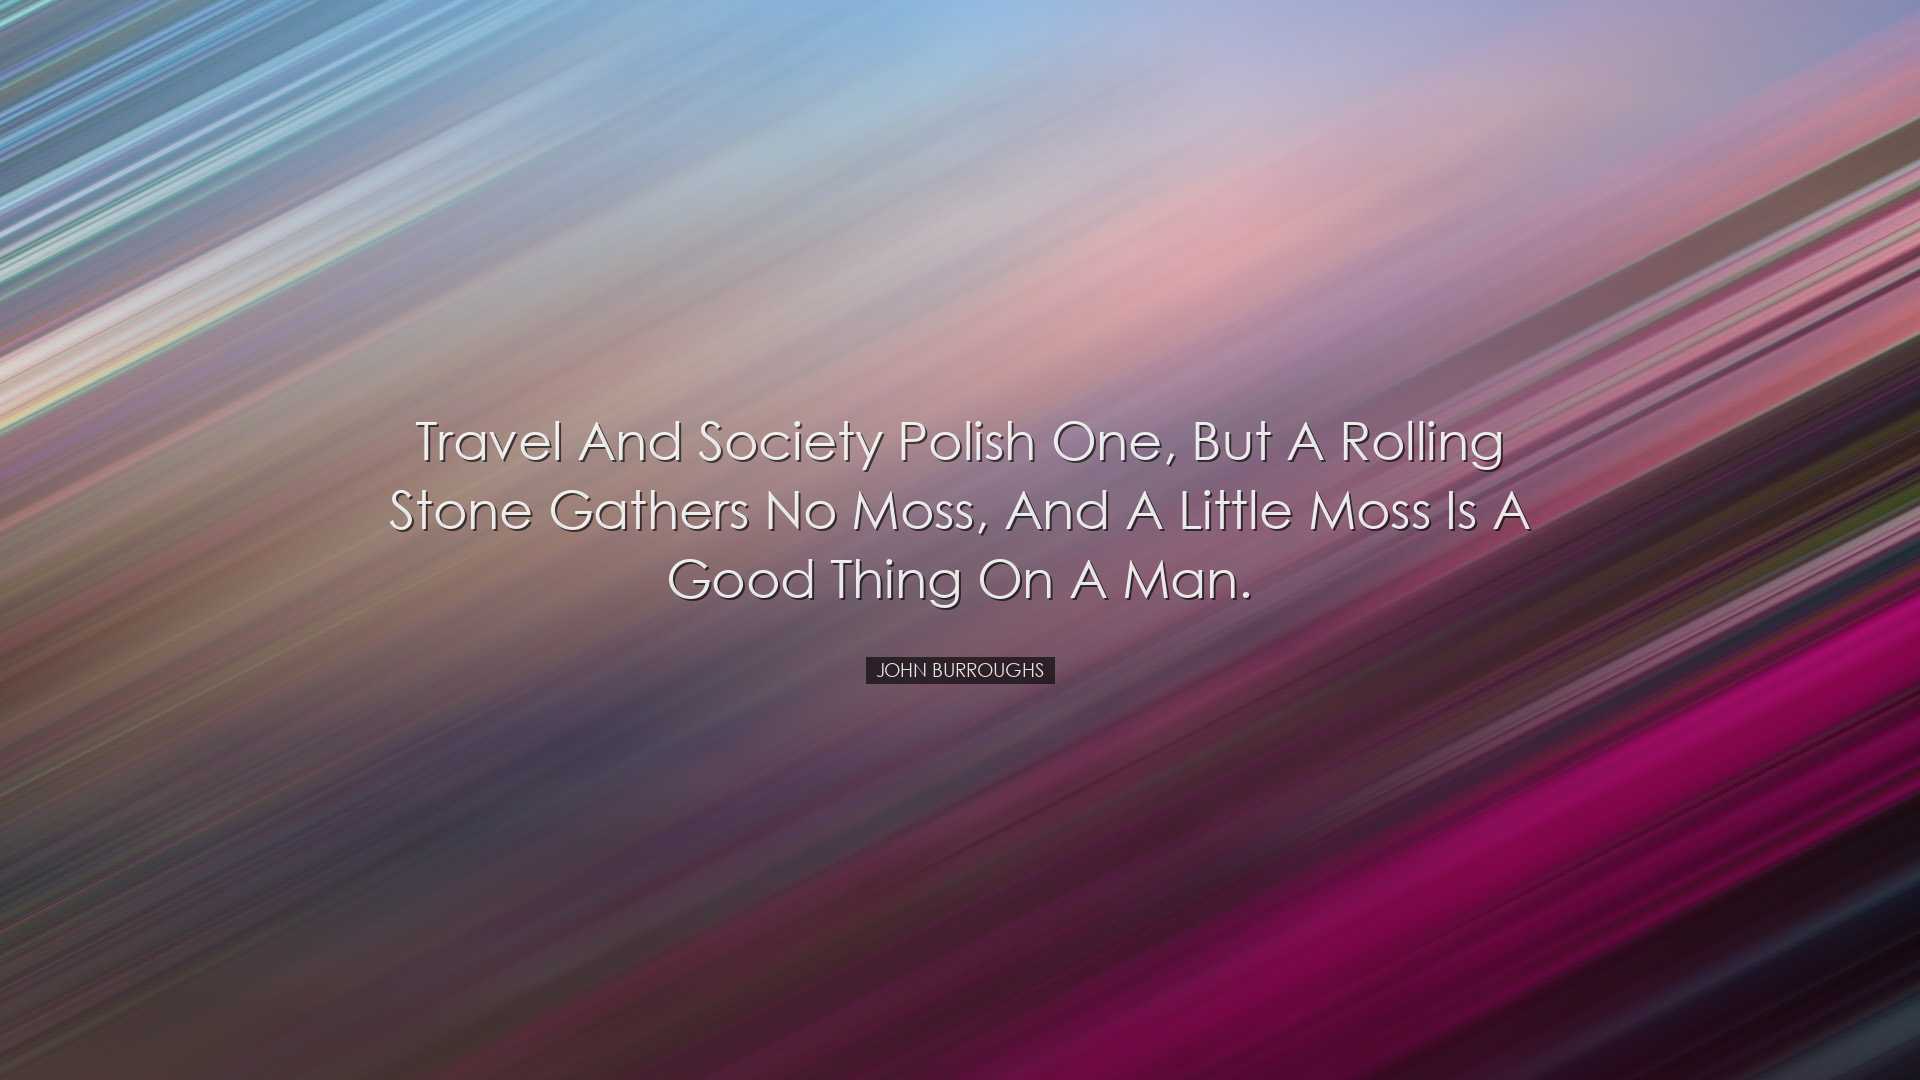 Travel and society polish one, but a rolling stone gathers no moss